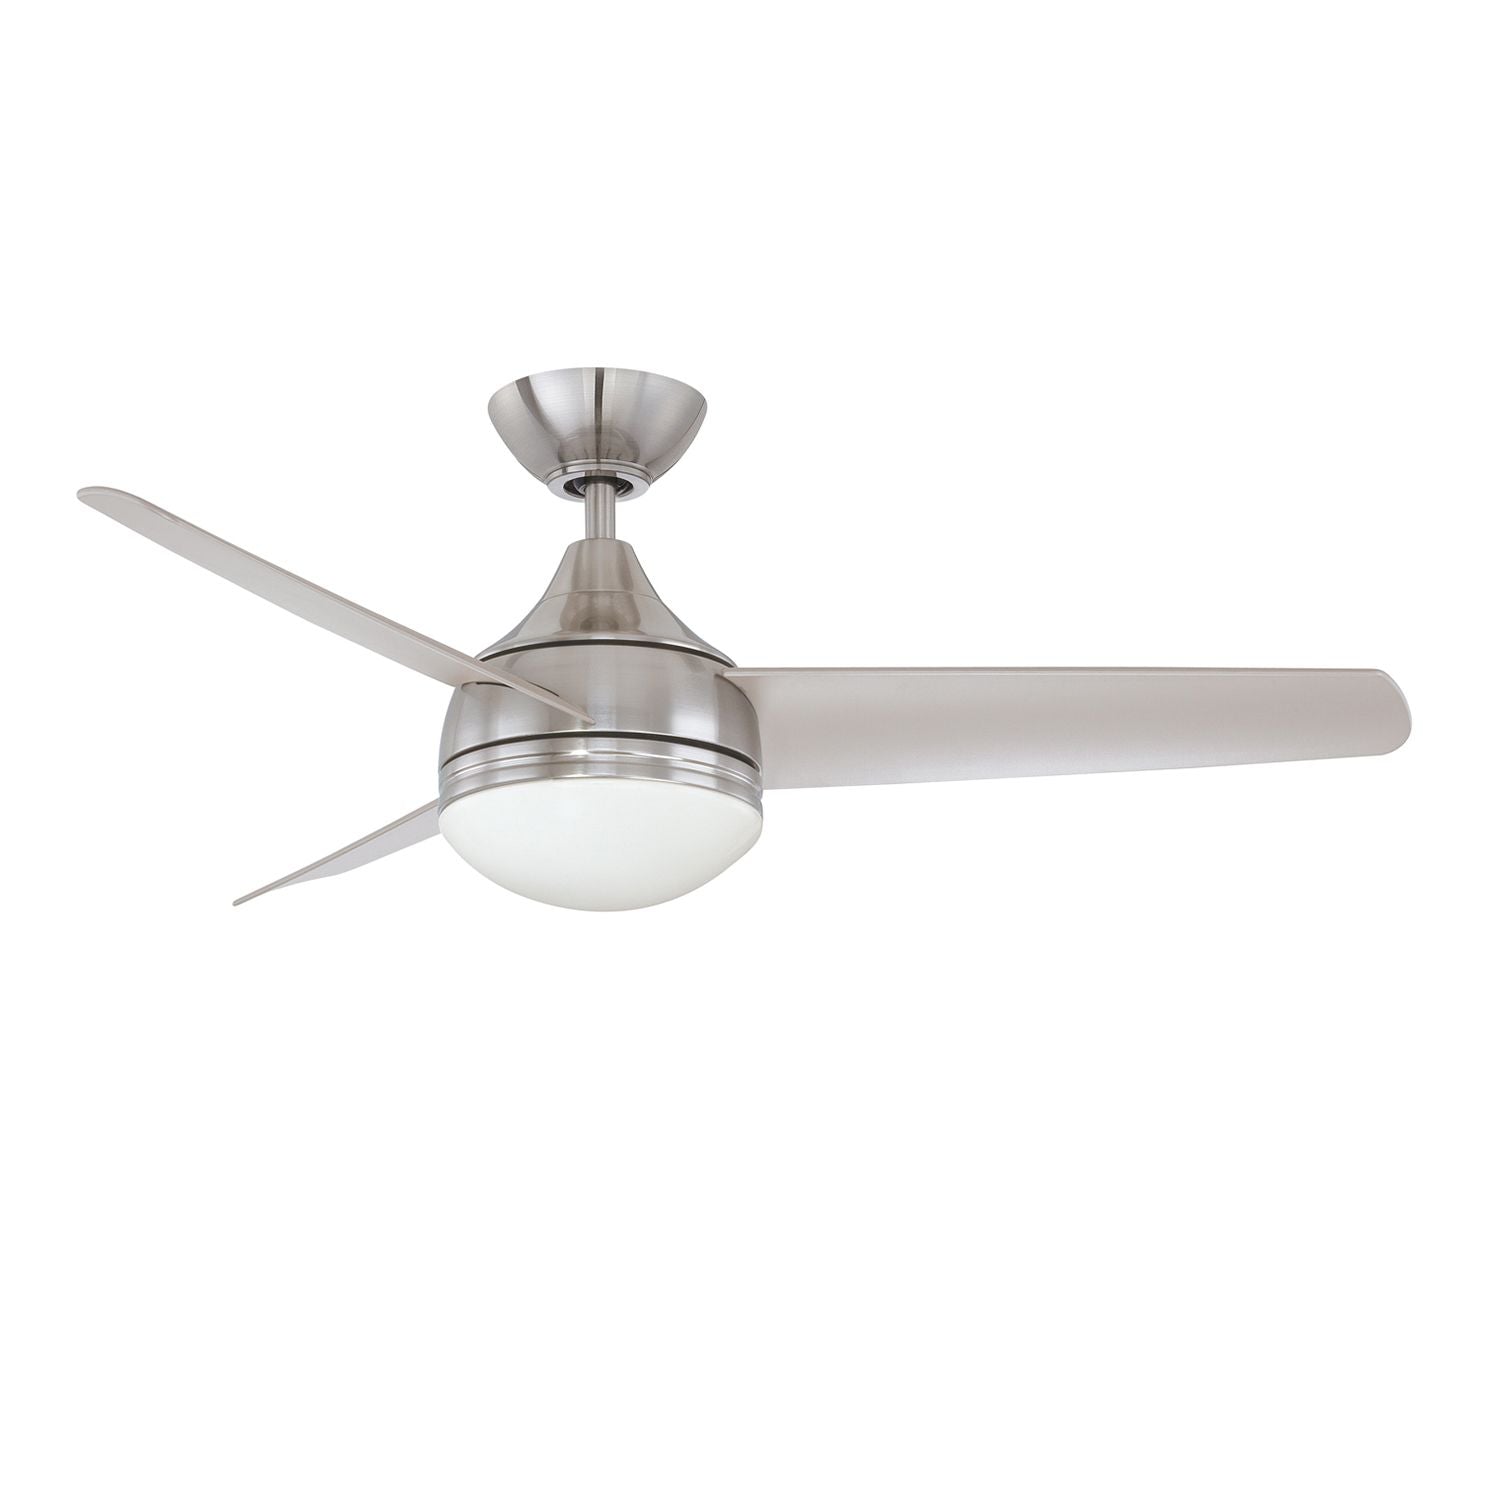 Moderno Ceiling Fan Satin Nickel with Silver blades